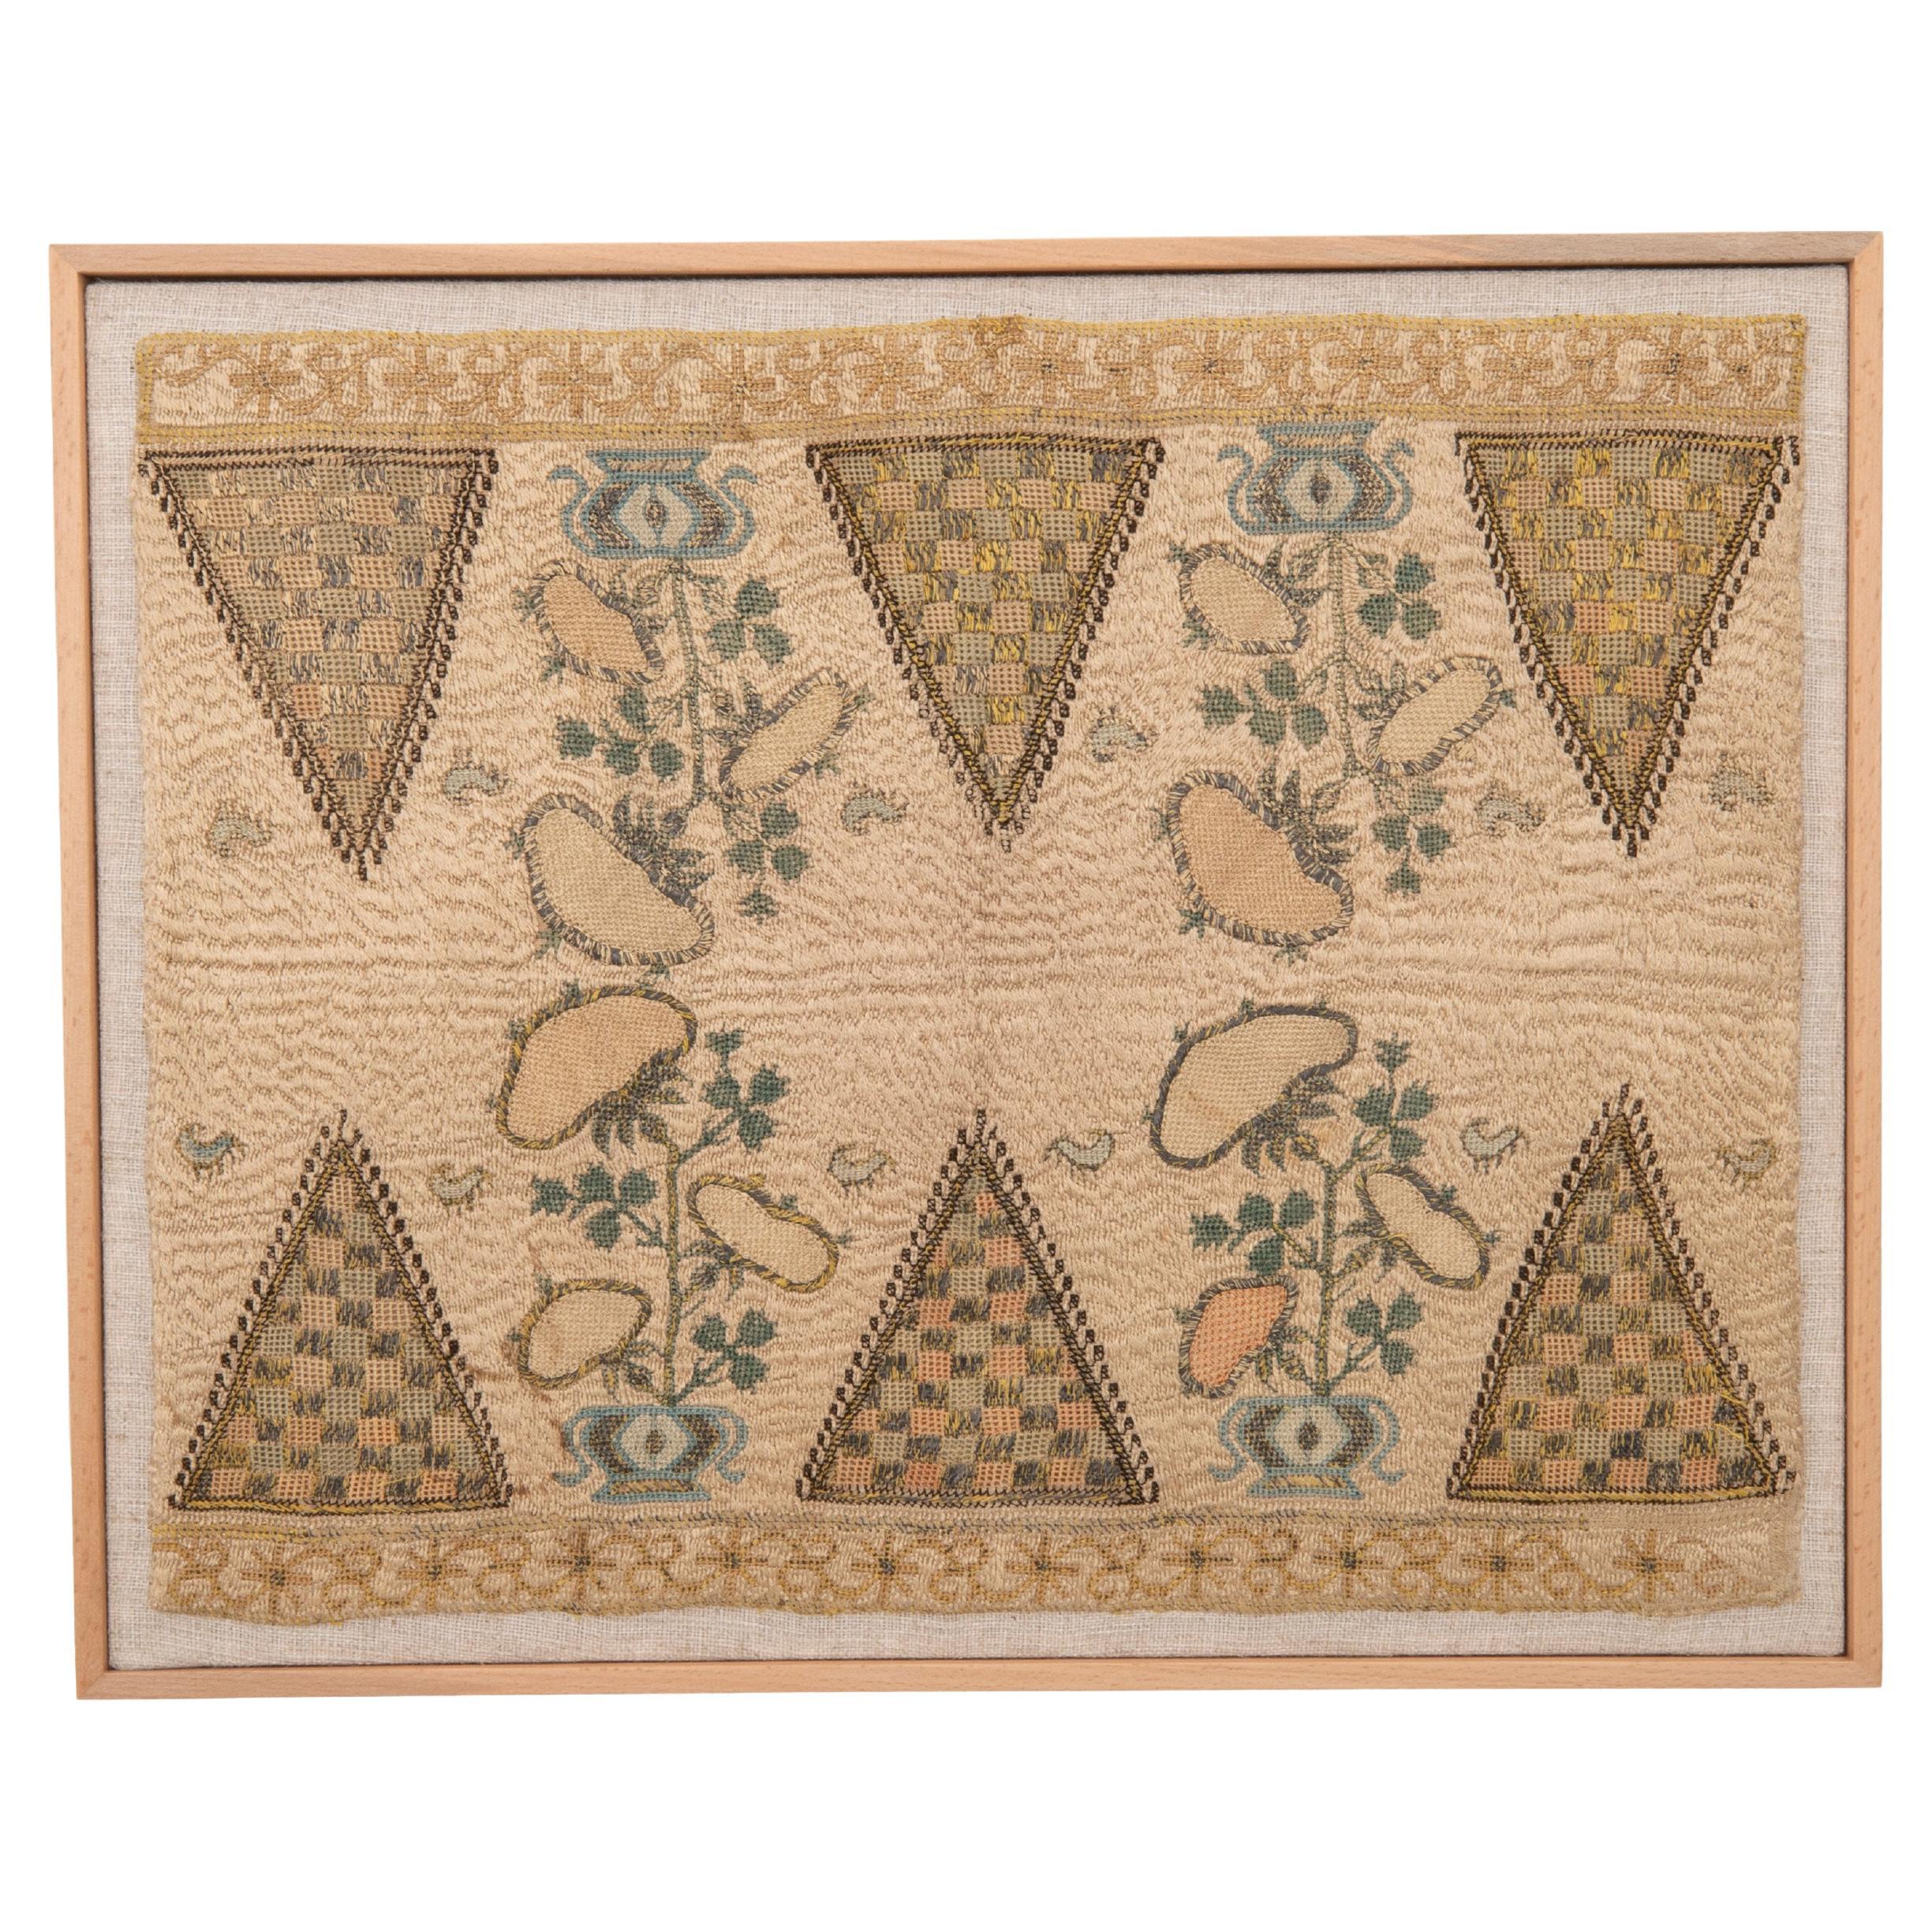 Professionally Framed Antique Ottoman / Greek Embroıdery Fragment, 19th C. For Sale